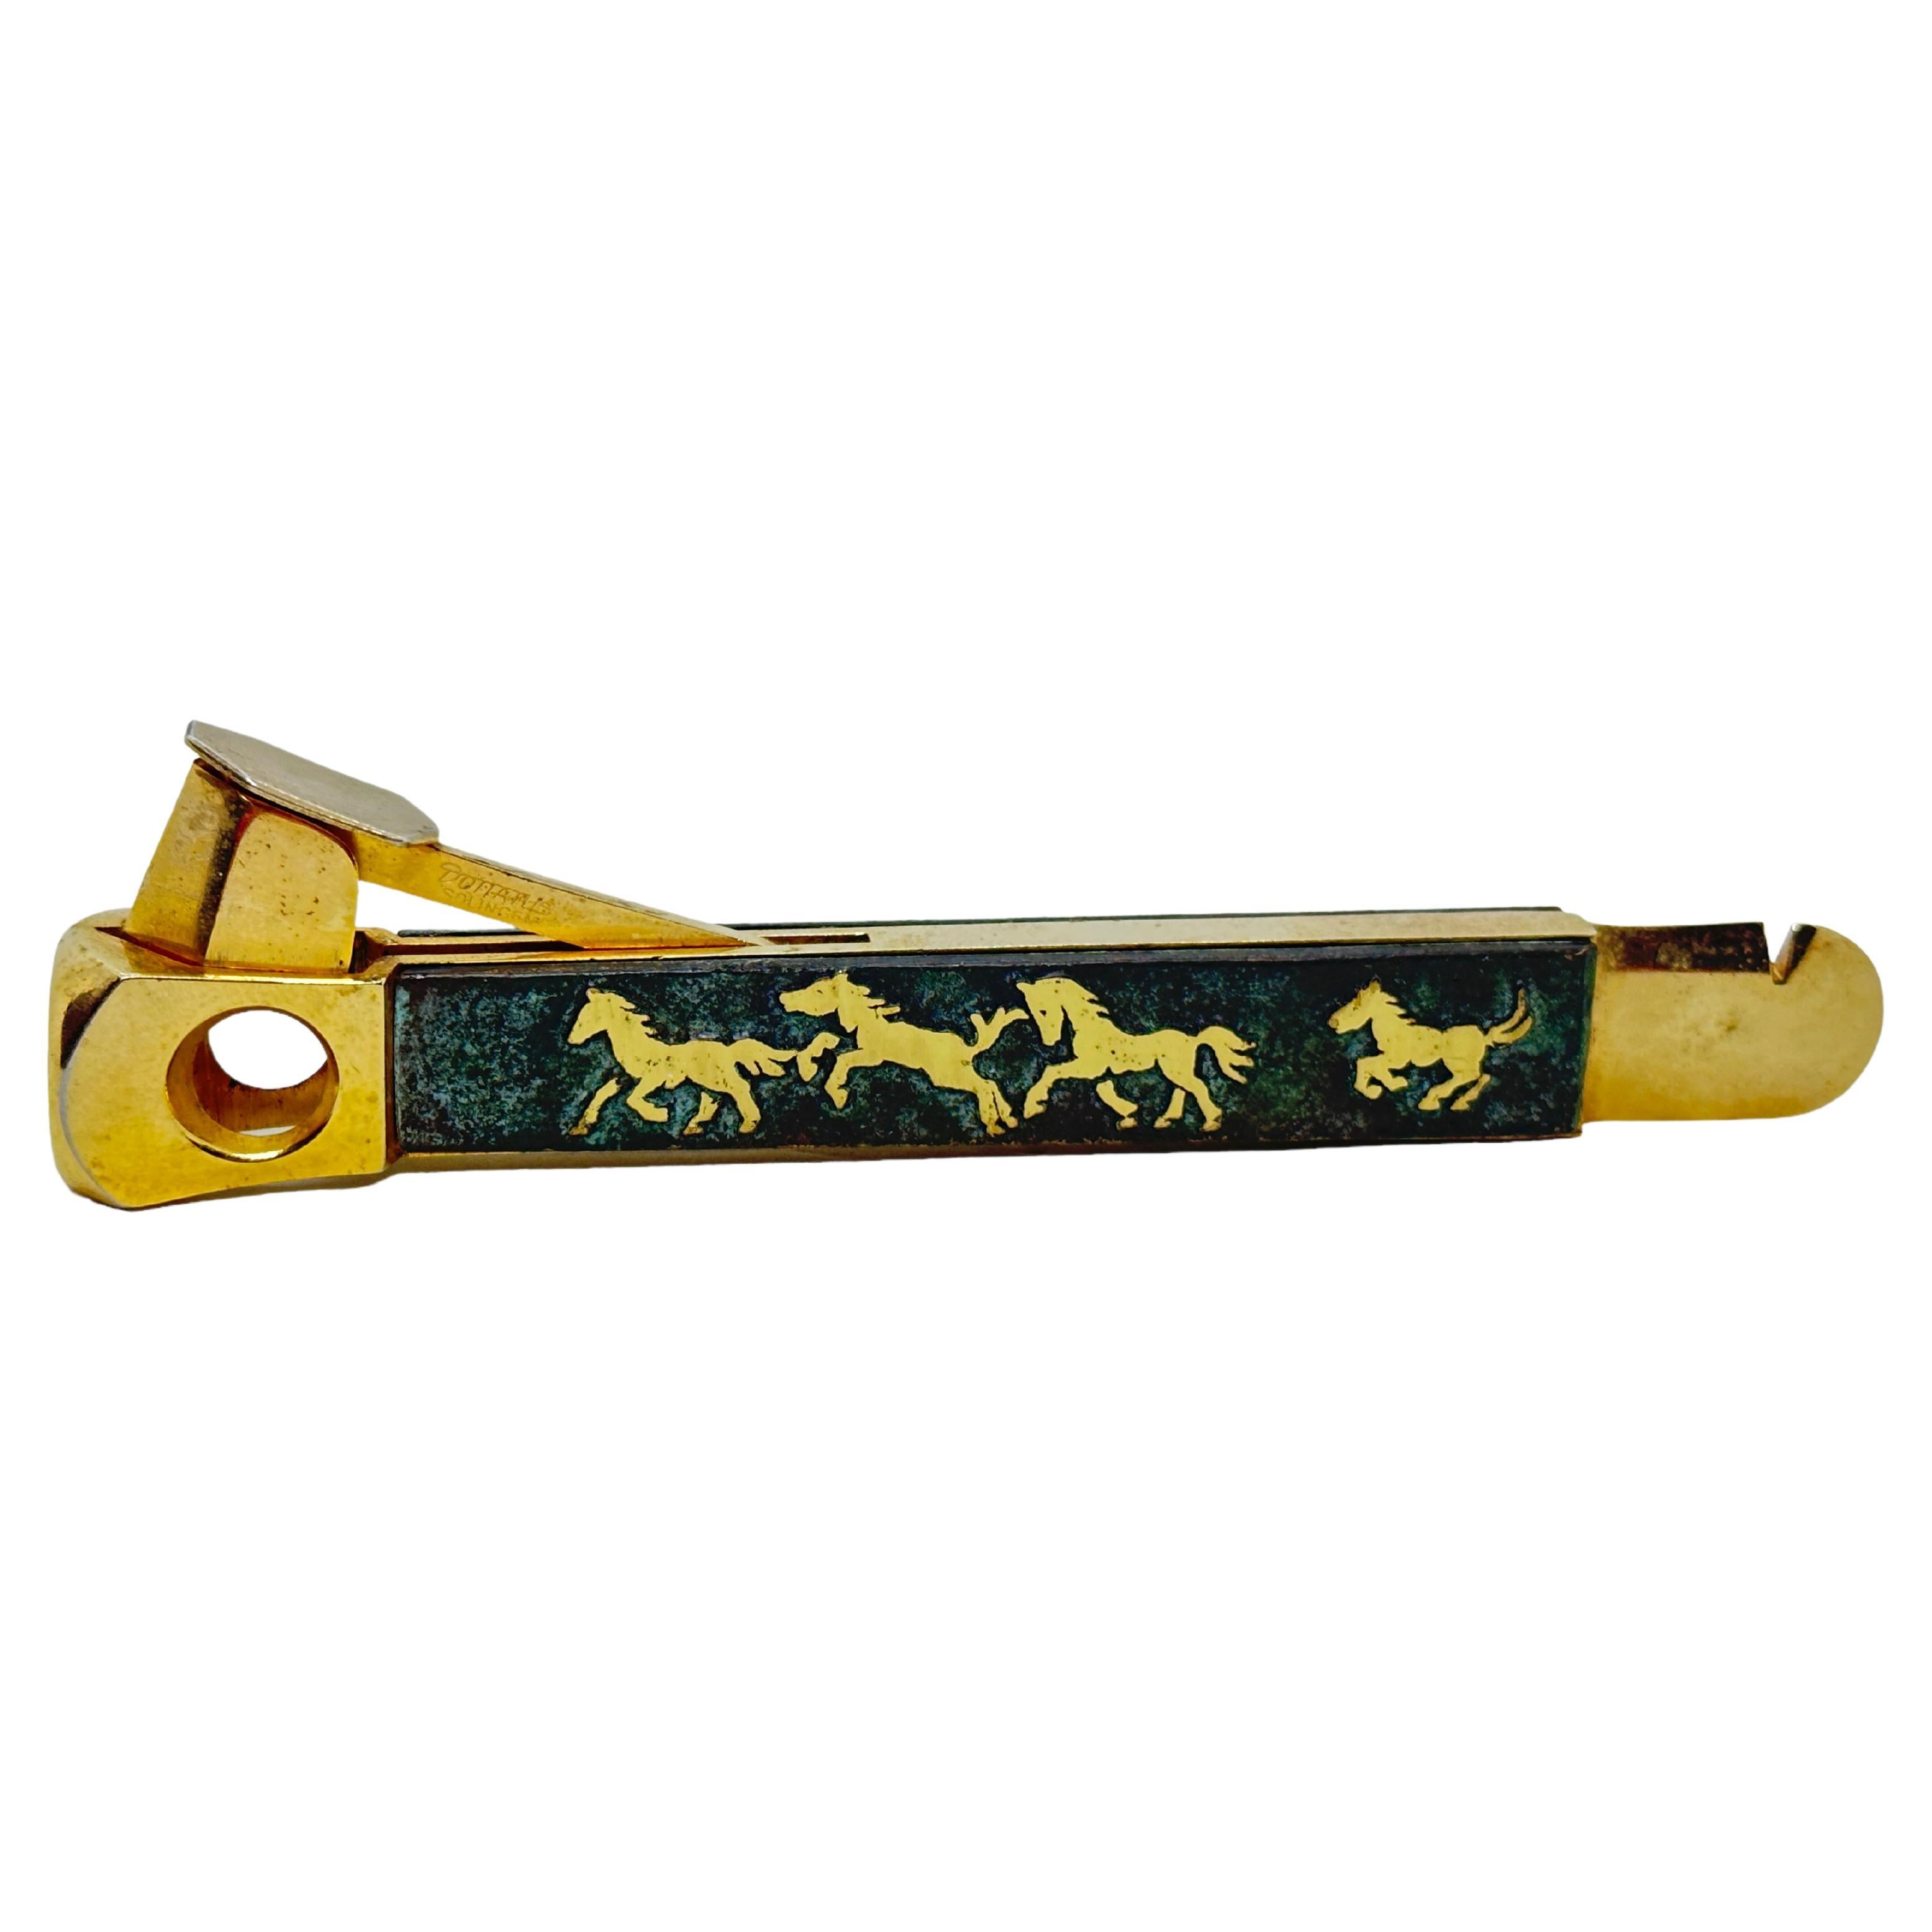 vintage Cigar Cutter with Horse Motif, 1950s German